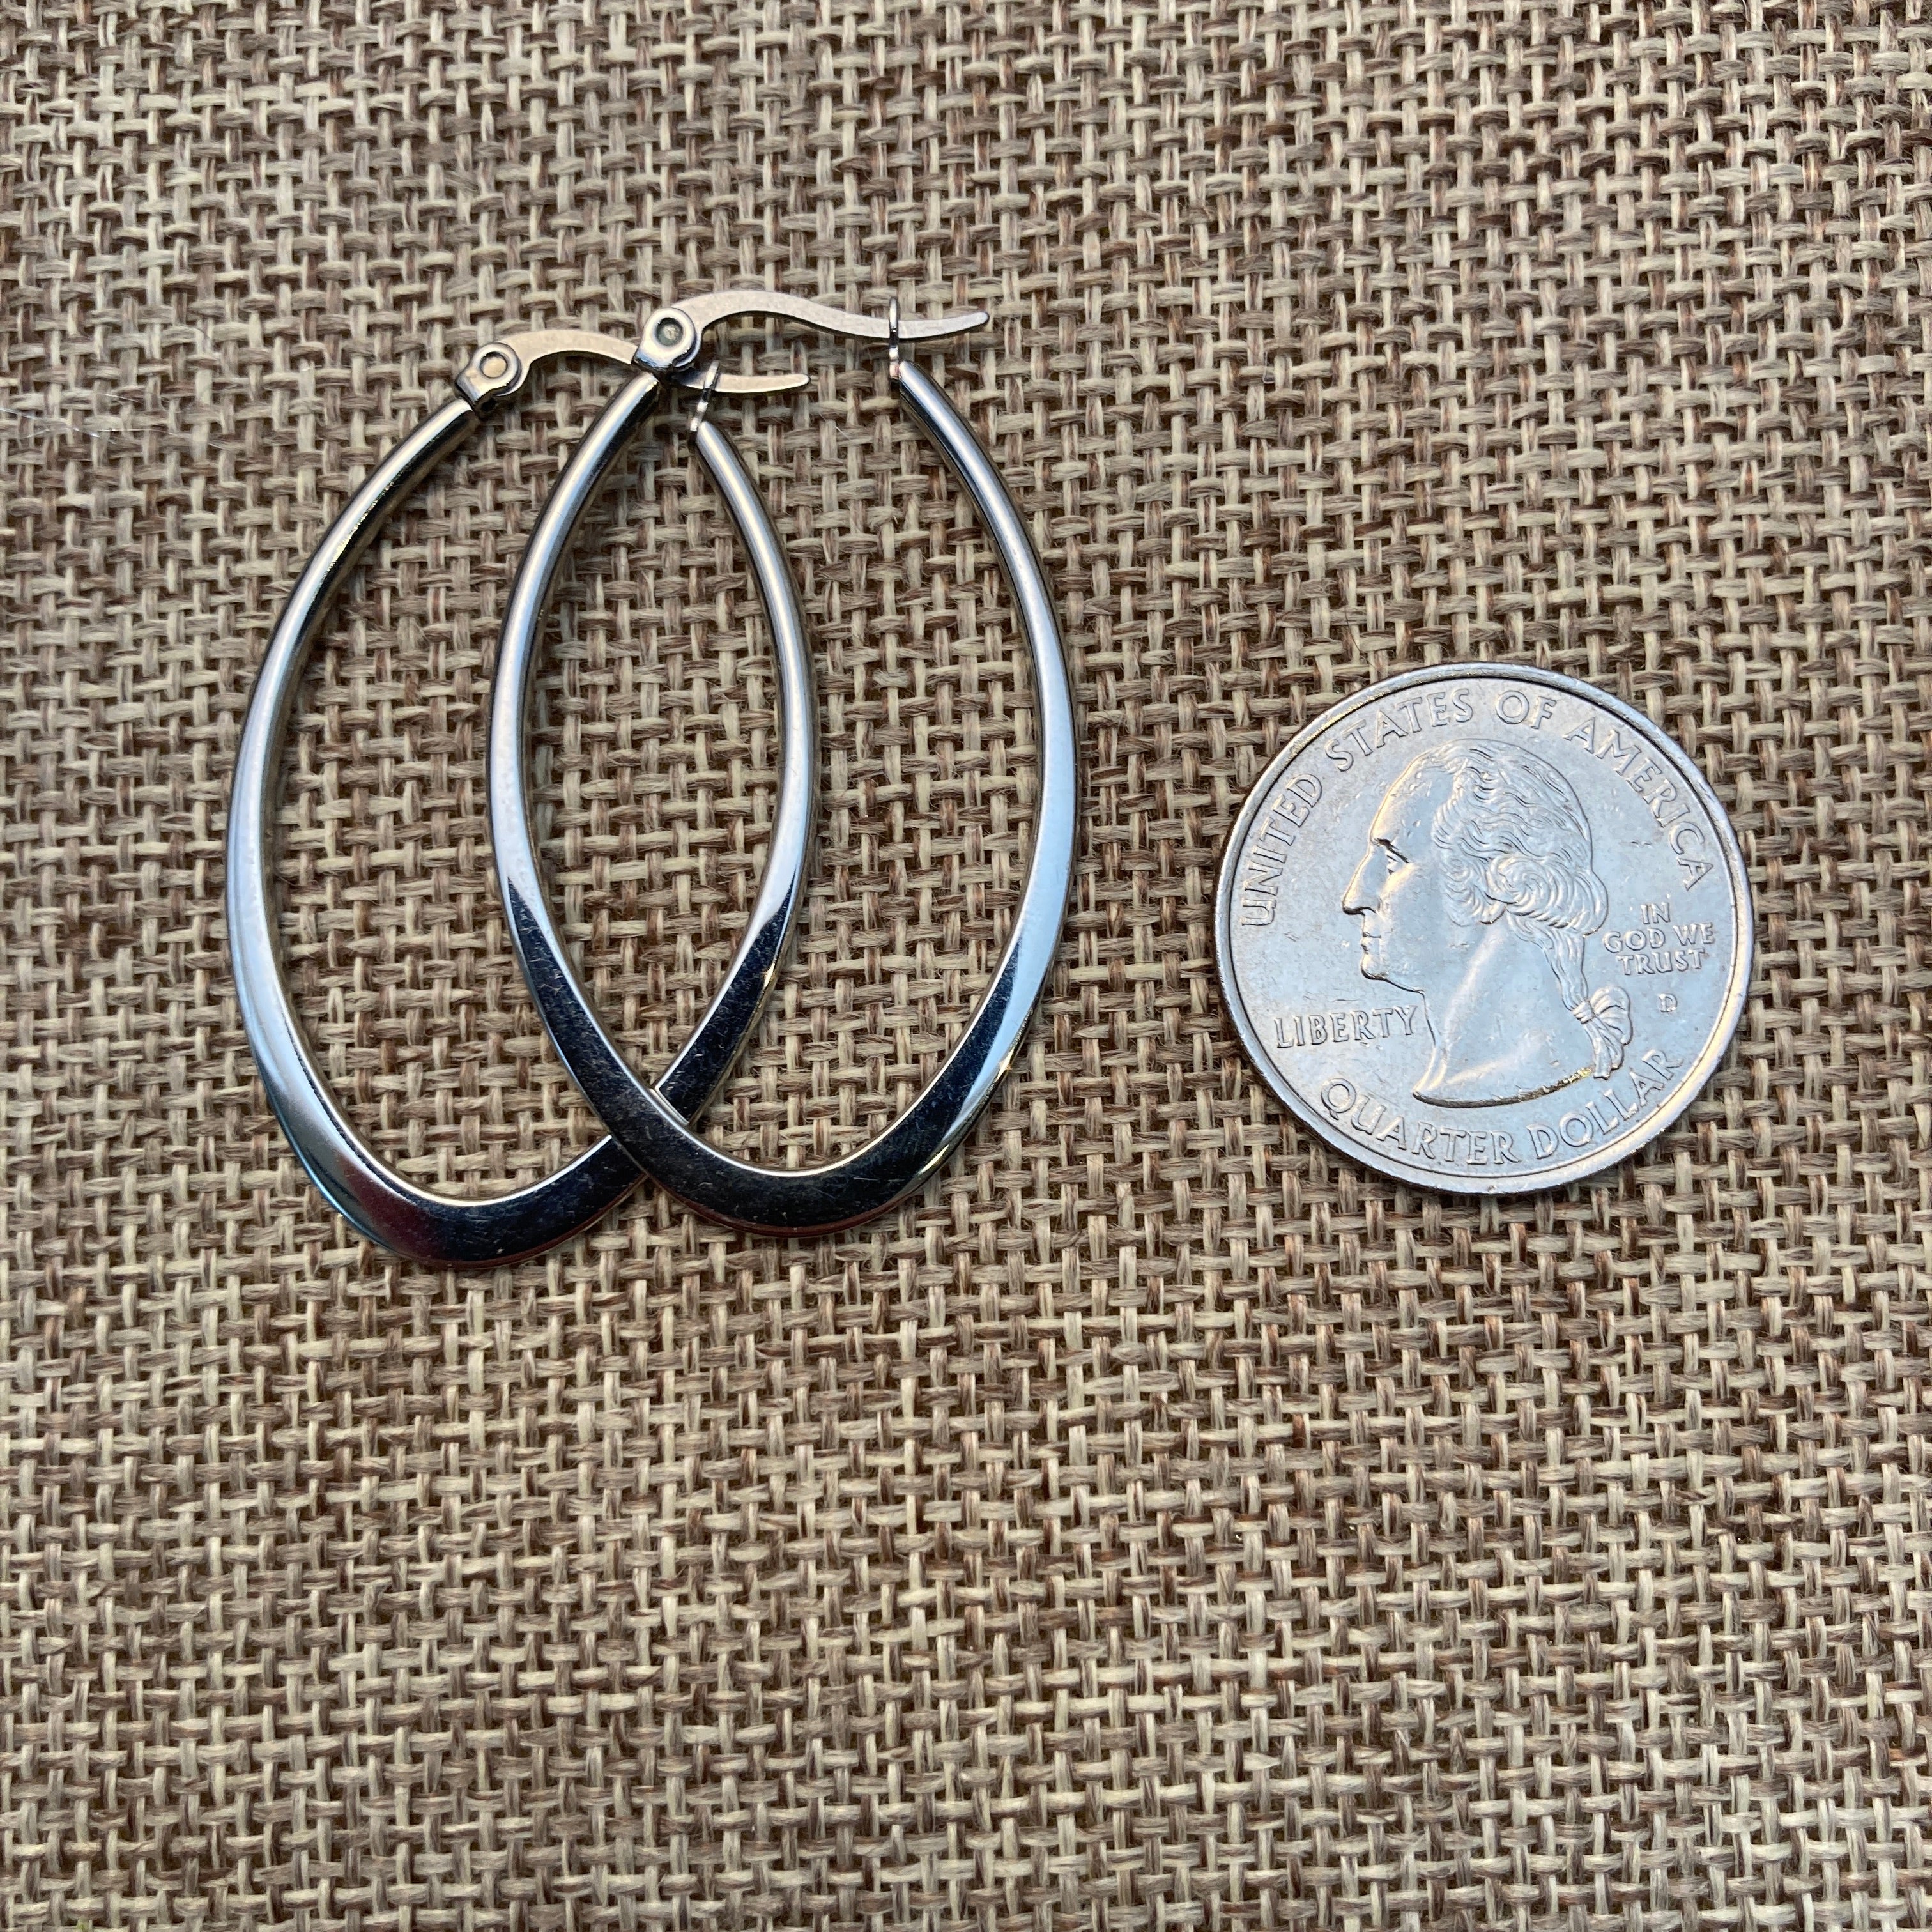 Stainless Steel Oval Hoops